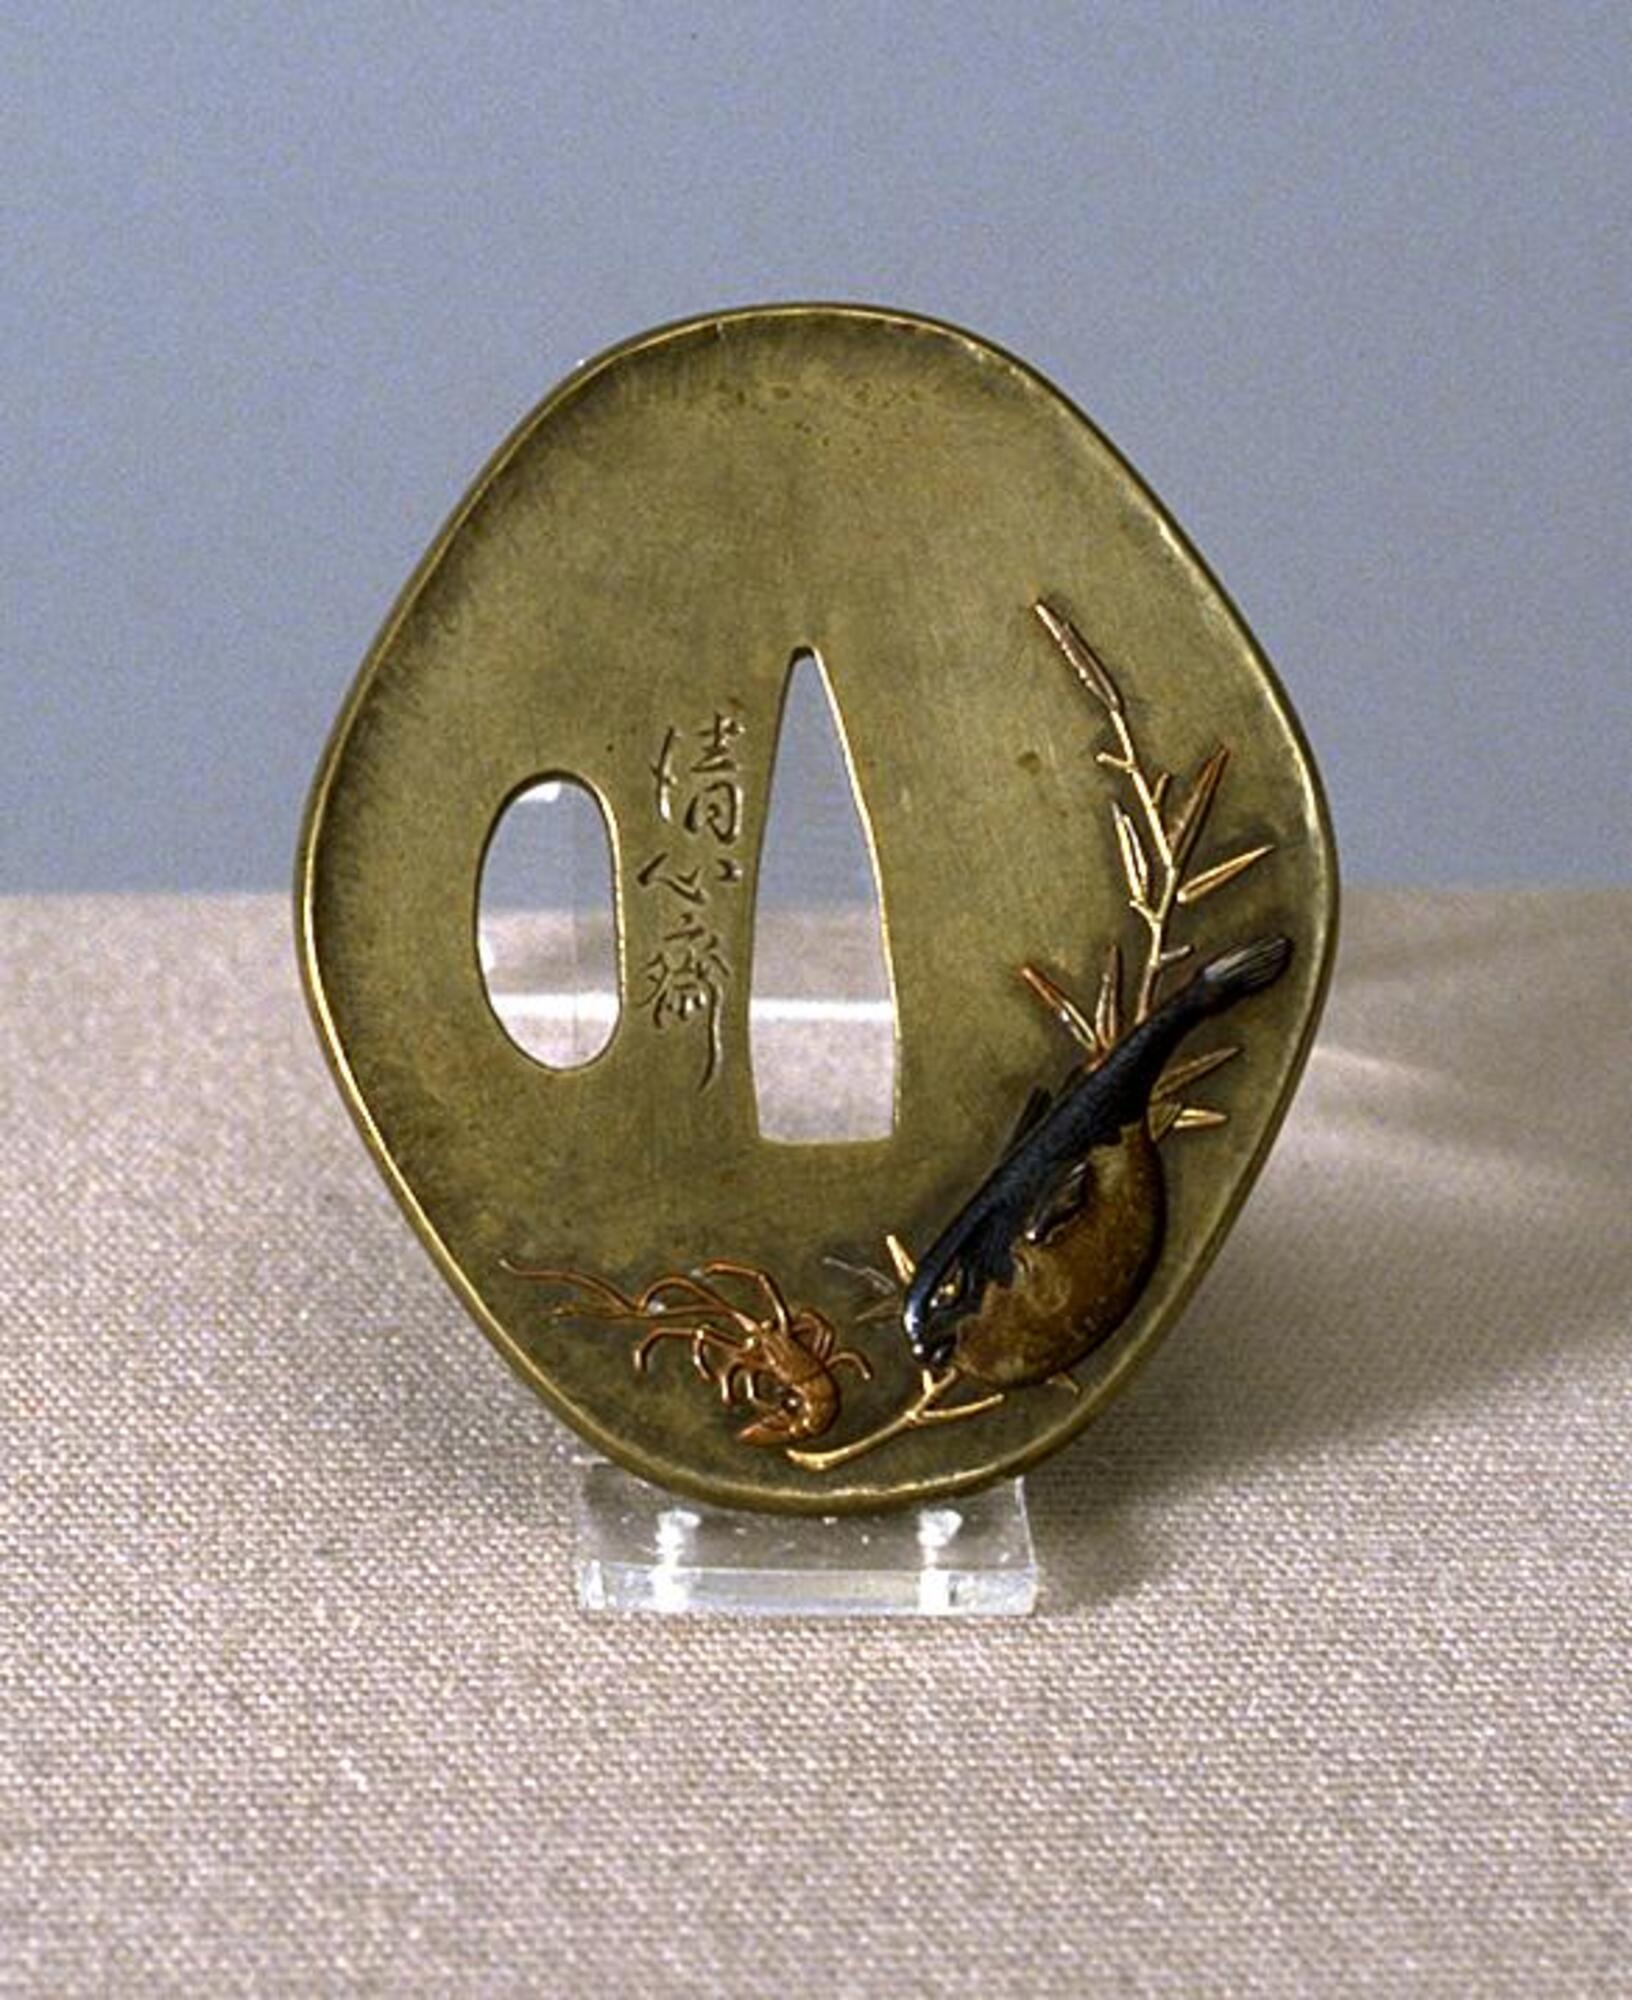 This small, flat piece made of light brown brass (called "sentoku" in Japanese) has a round diamond shape. It has a triangular shaped hole in the center and another round hole on one side. Artist’s name is signed between the two holes. The surface is slightly concaved from the rim. The front has relief design of a shrimp, blowfish, and bamboo branch. On the back, there are designs of a spiral shell, a barnacle, and water drops. The sea motifs are inlayed with gold, silver, copper, and shakudô (copper-gold alloy).